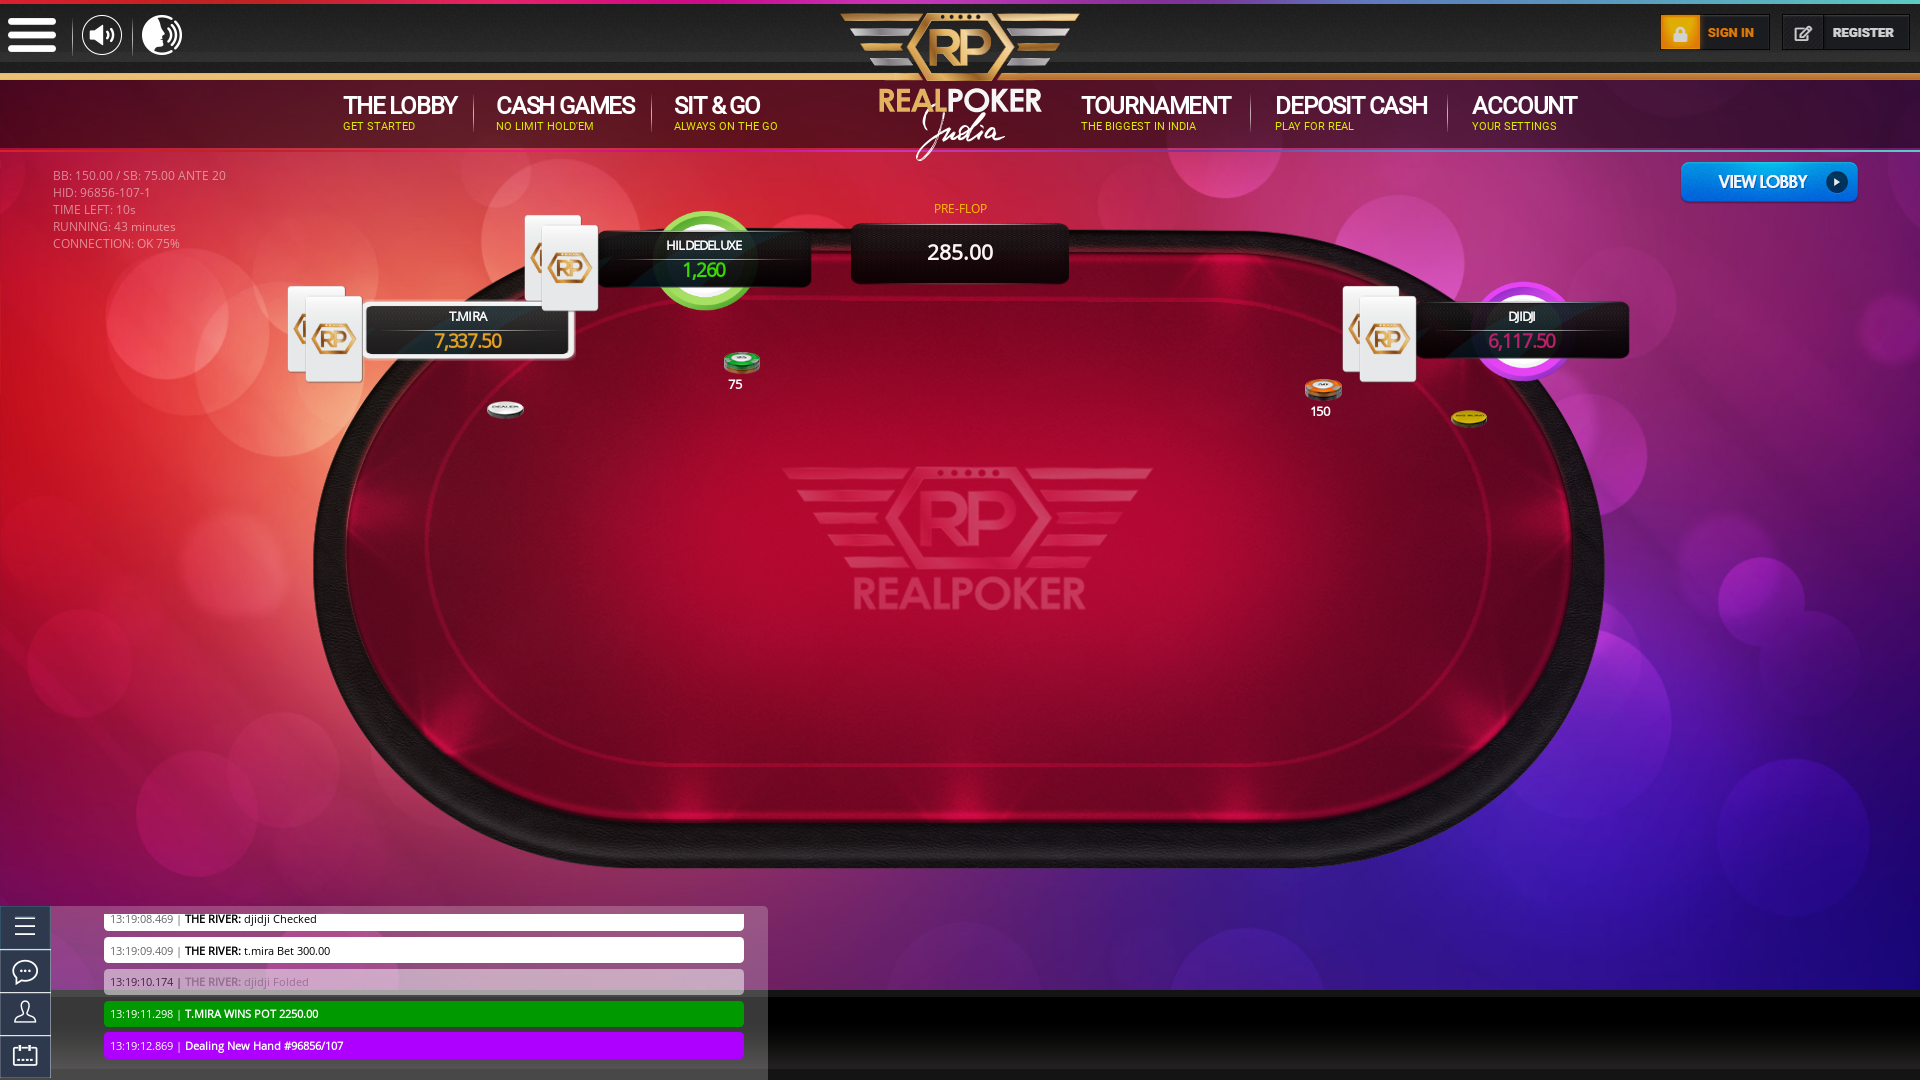 Real poker 10 player table in the 43rd minute